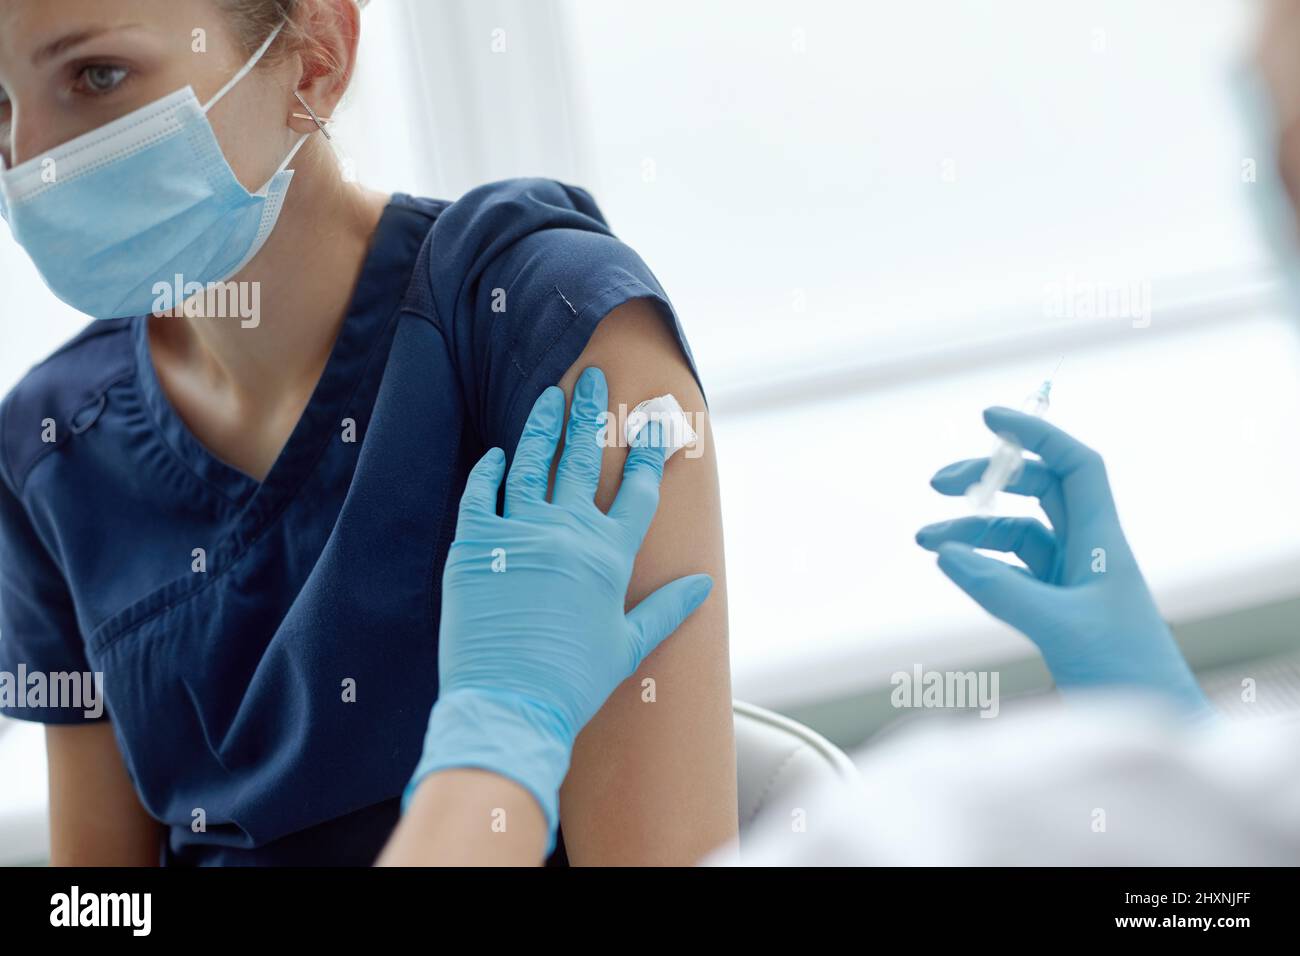 Vaccination, disease prevention concept. Woman in medical face mask getting Covid-19 vaccine. nurse giving flu injection to patient Stock Photo